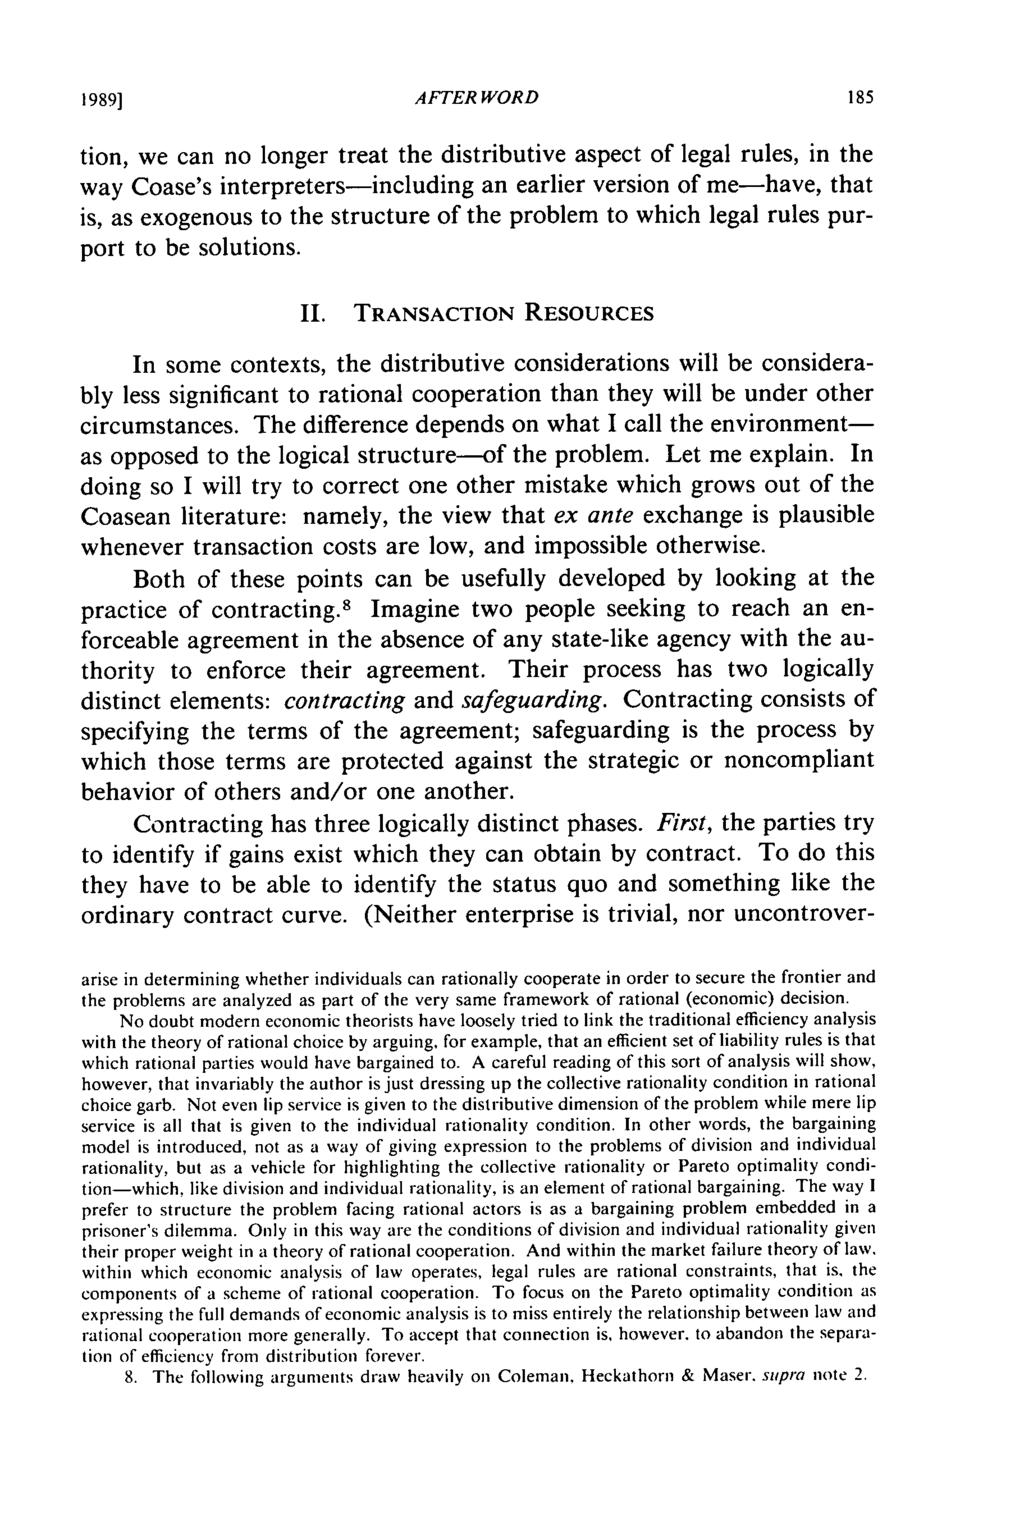 1989] AFTER WORD tion, we can no longer treat the distributive aspect of legal rules, in the way Coase's interpreters-including an earlier version of me-have, that is, as exogenous to the structure